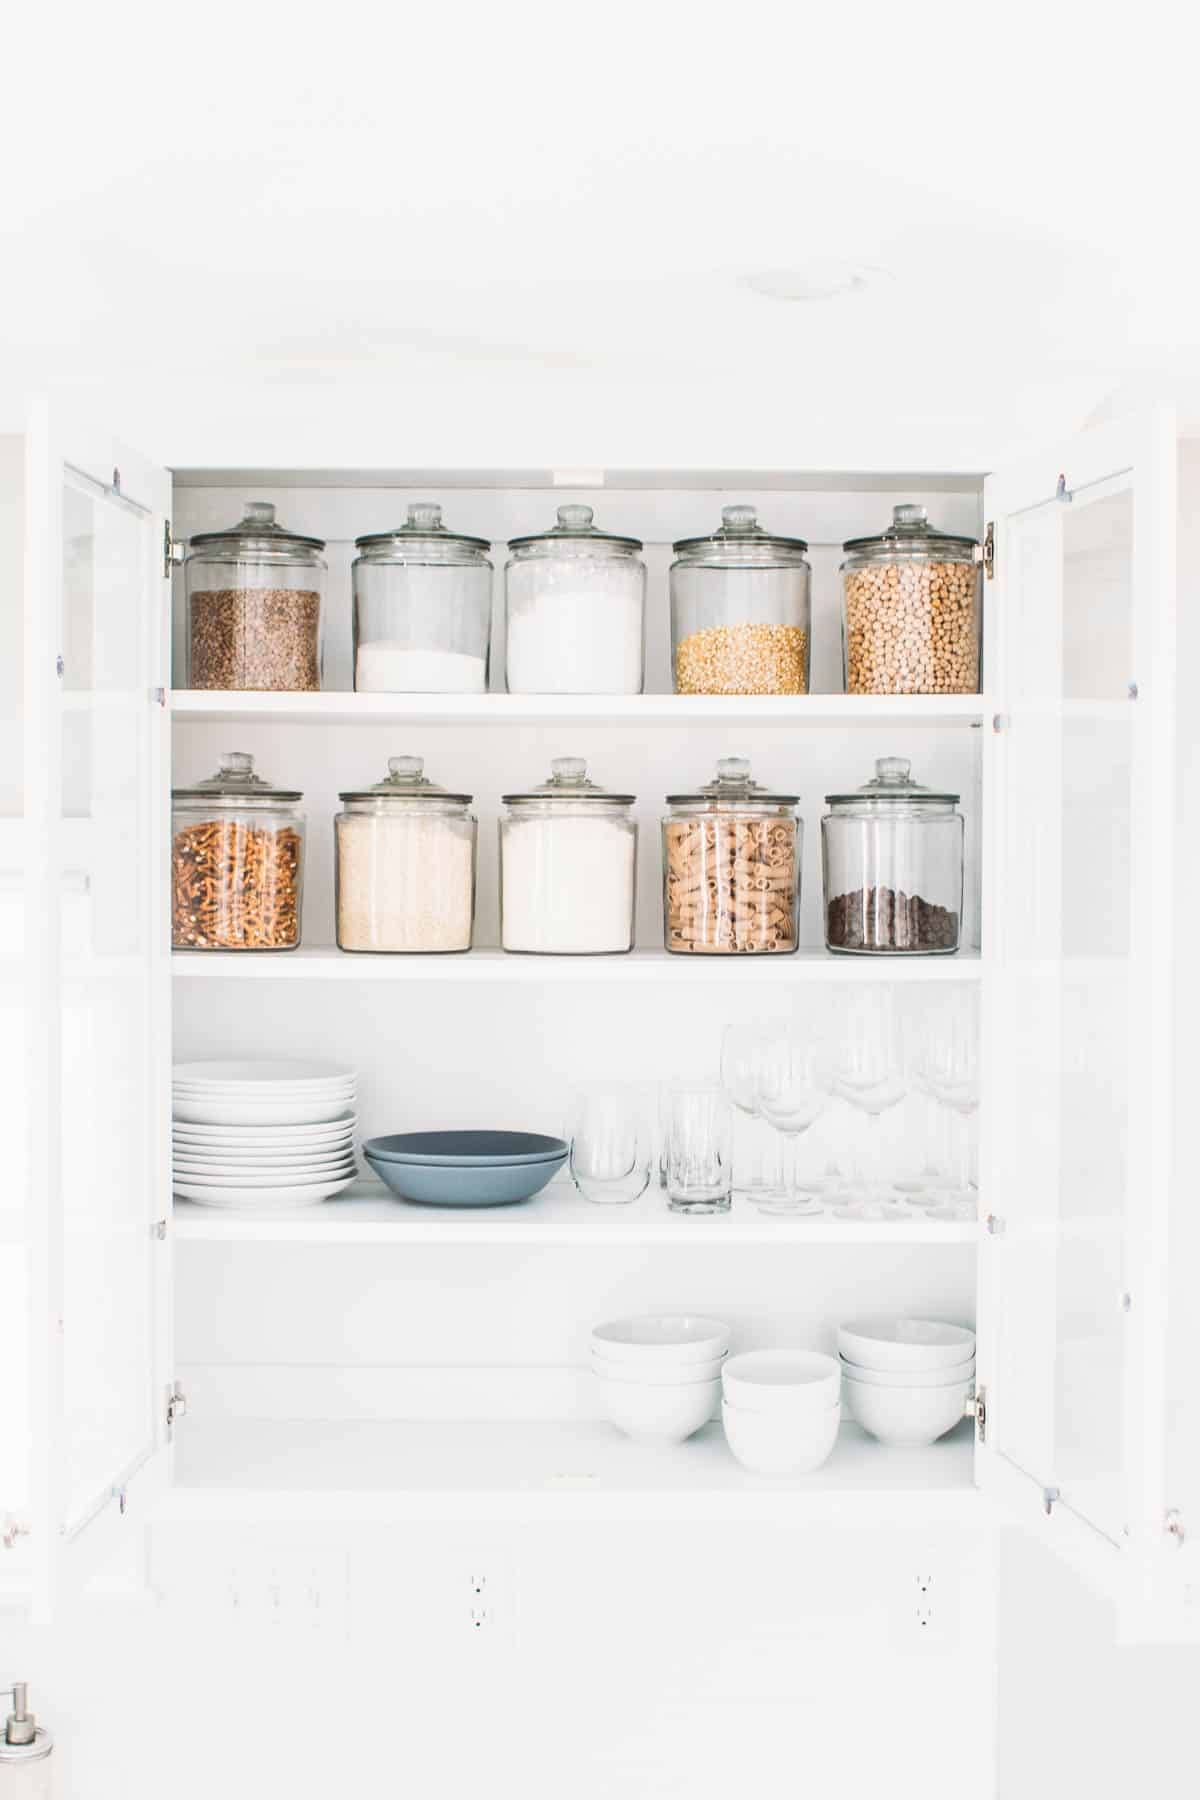 Cupboard with containers and dishes.